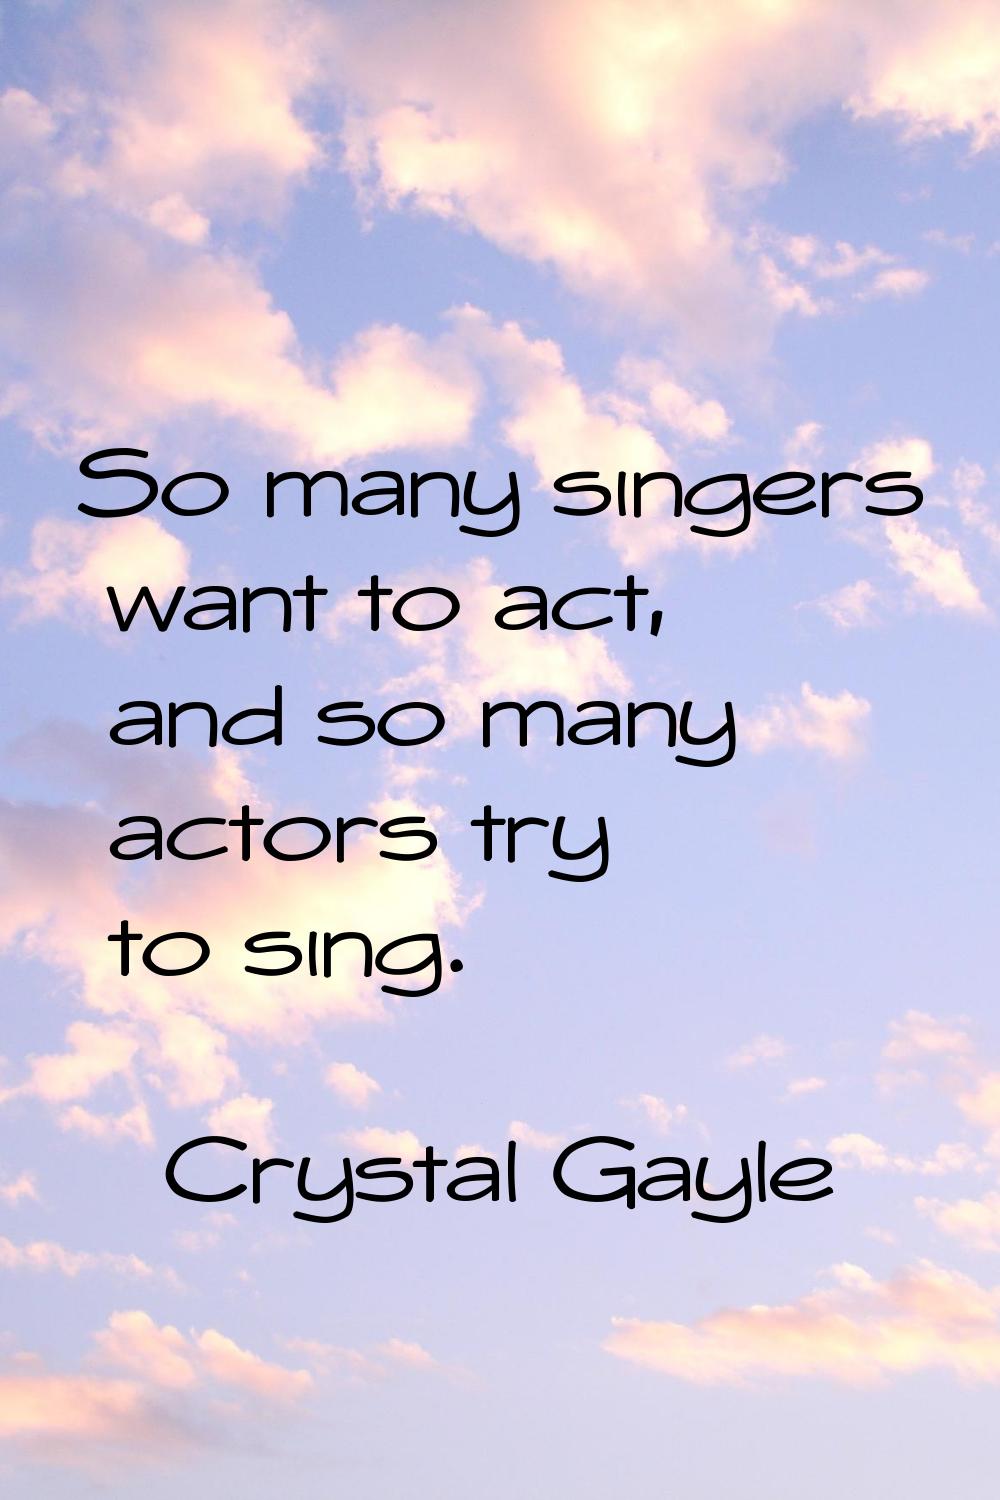 So many singers want to act, and so many actors try to sing.